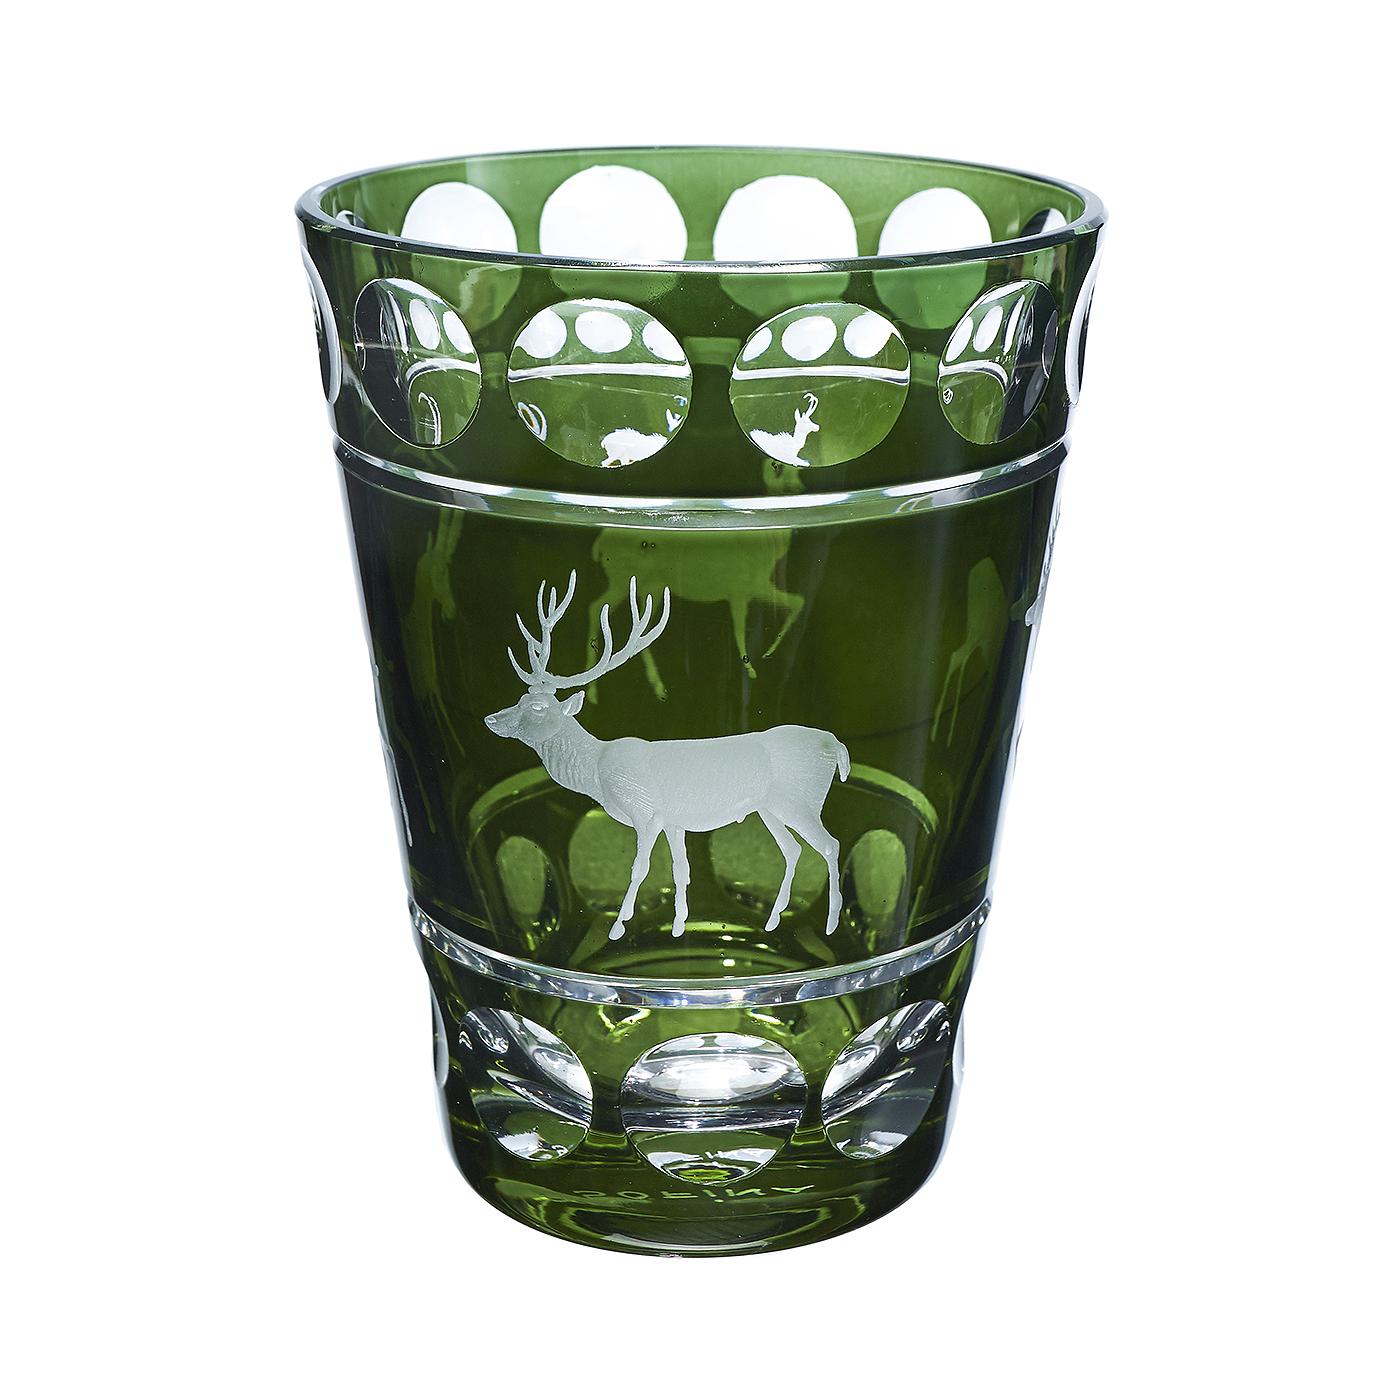 Hand-Crafted Black Forest Vase Green Crystal with Hunting Decor Sofina Boutique Kitzbuehel